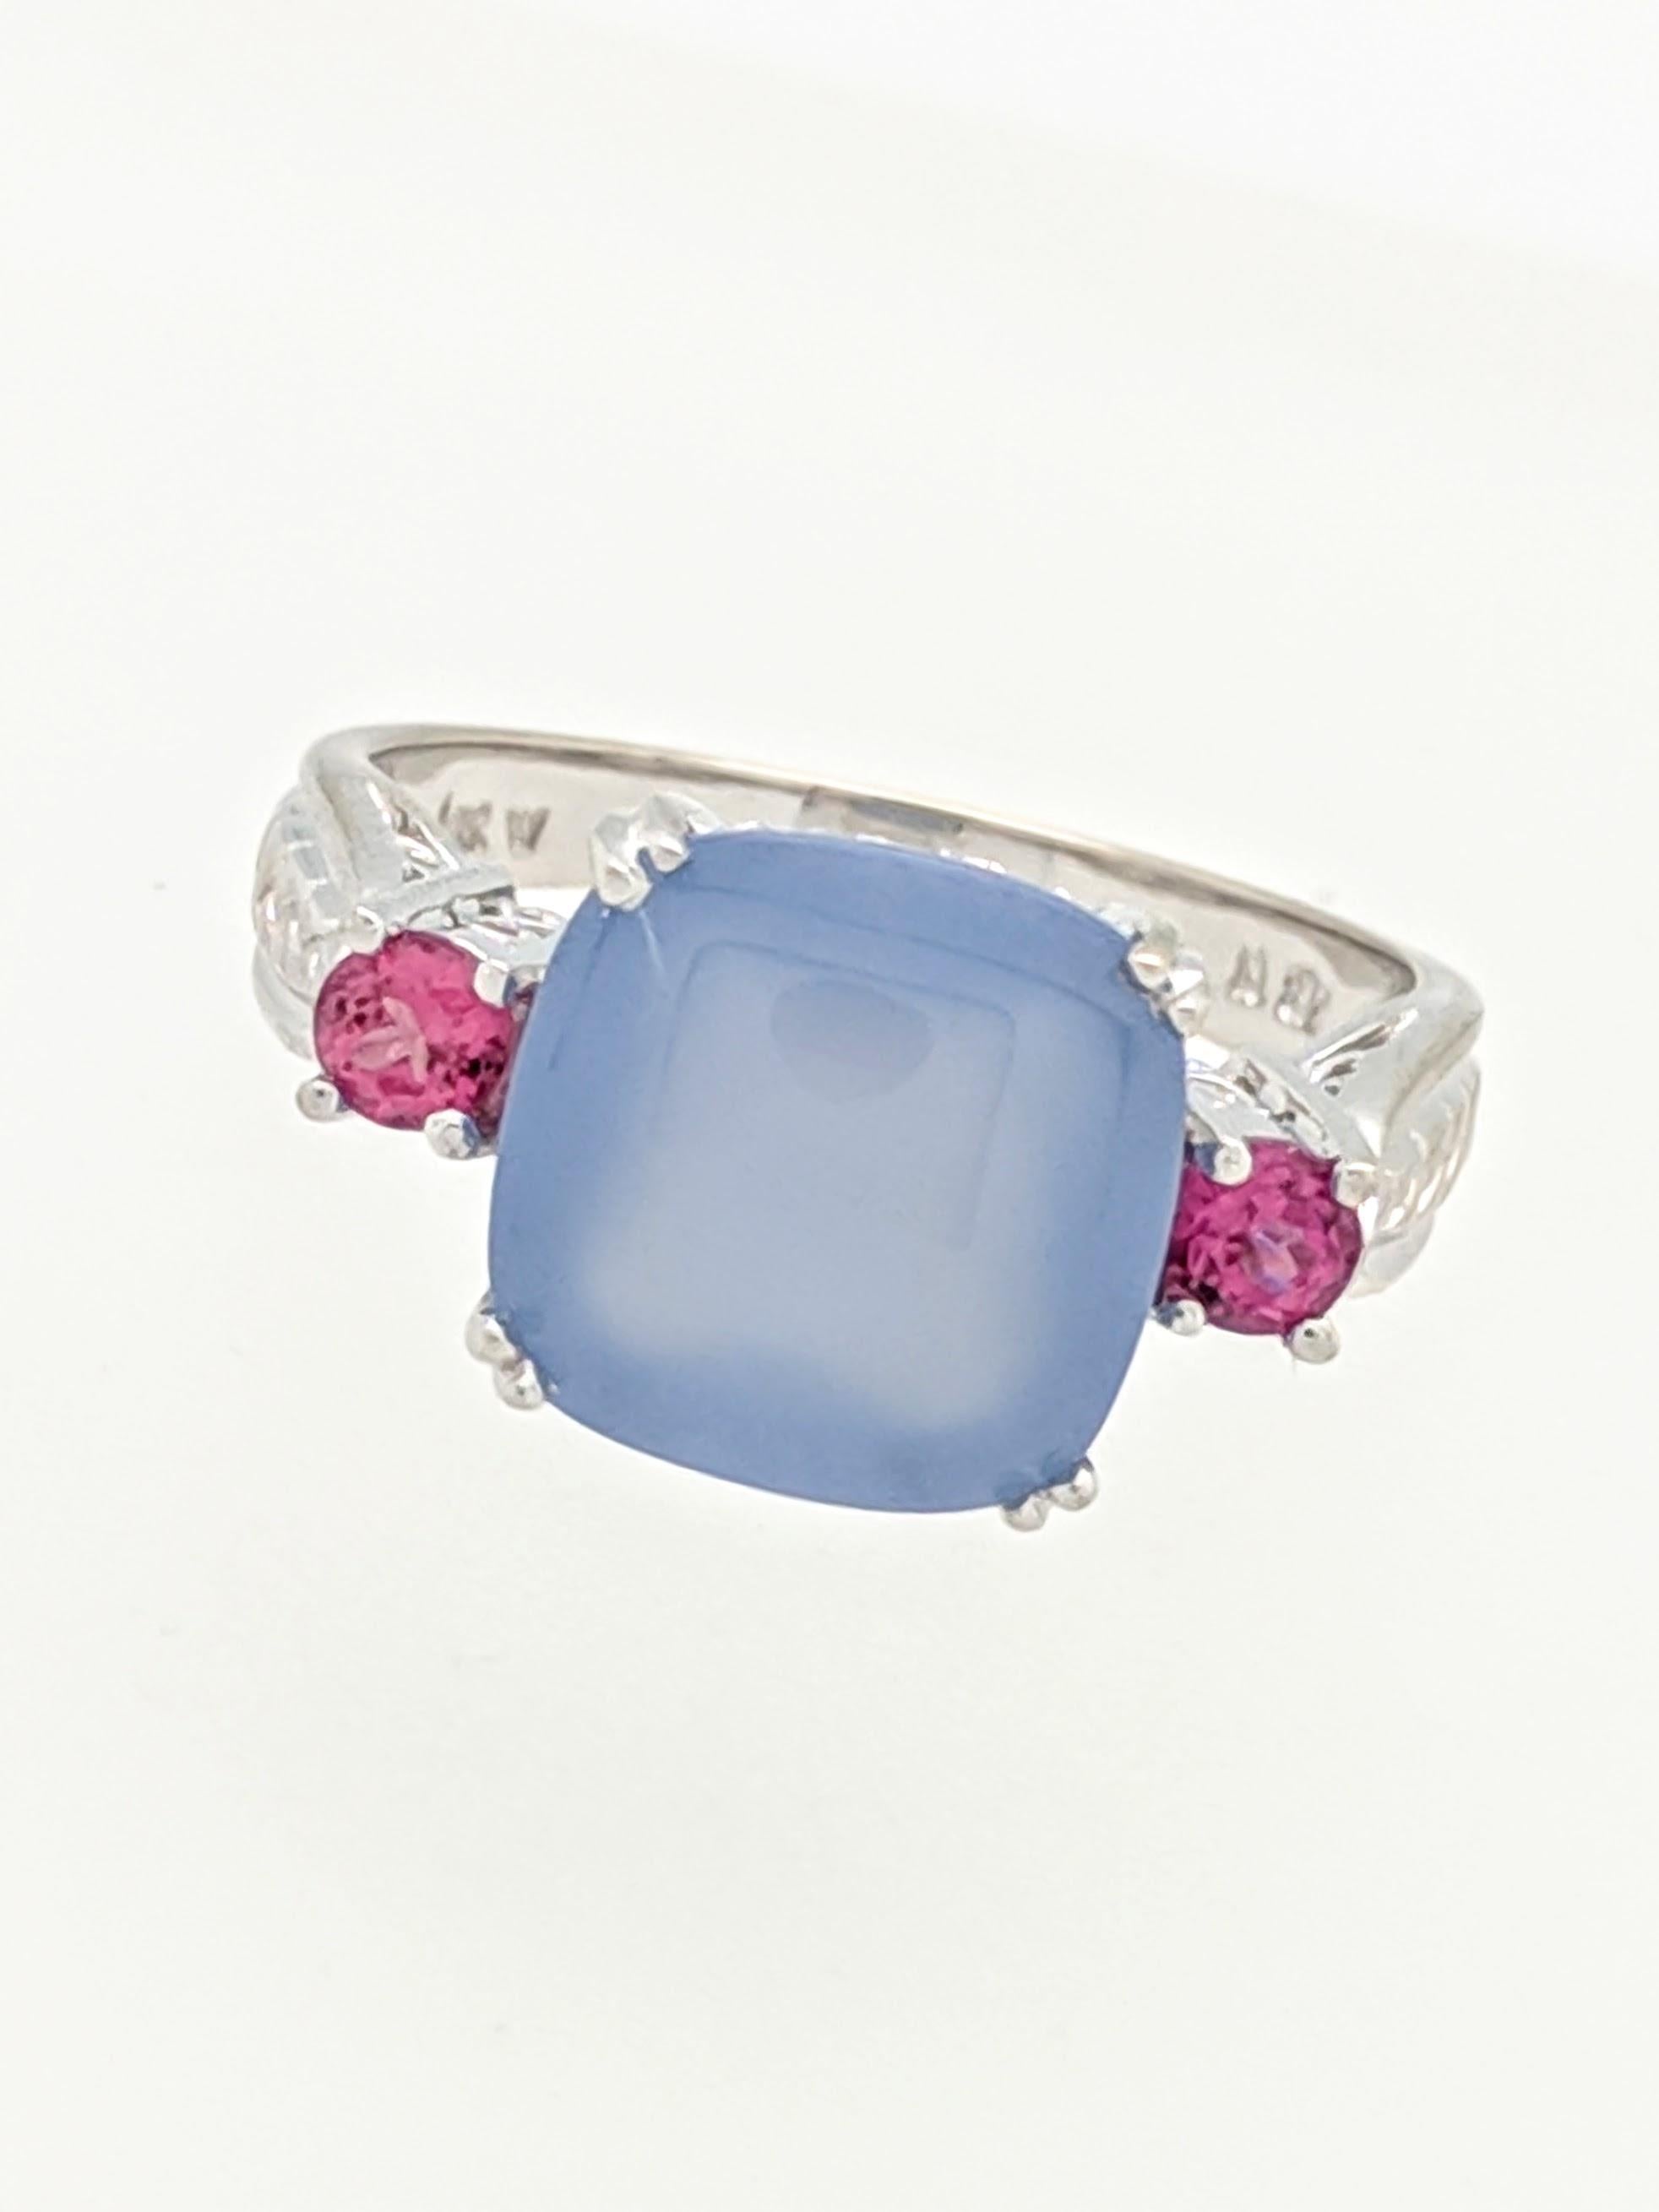 14k White Gold Cabochon Cut Purple Jade & Pink Tourmaline Ring

You are viewing a beautiful cabochon cut purple jade and pink tourmaline ring. This ring is crafted from 14k white gold and weighs 4.4 grams. It features (1) 10x10mm cabochon cut purple